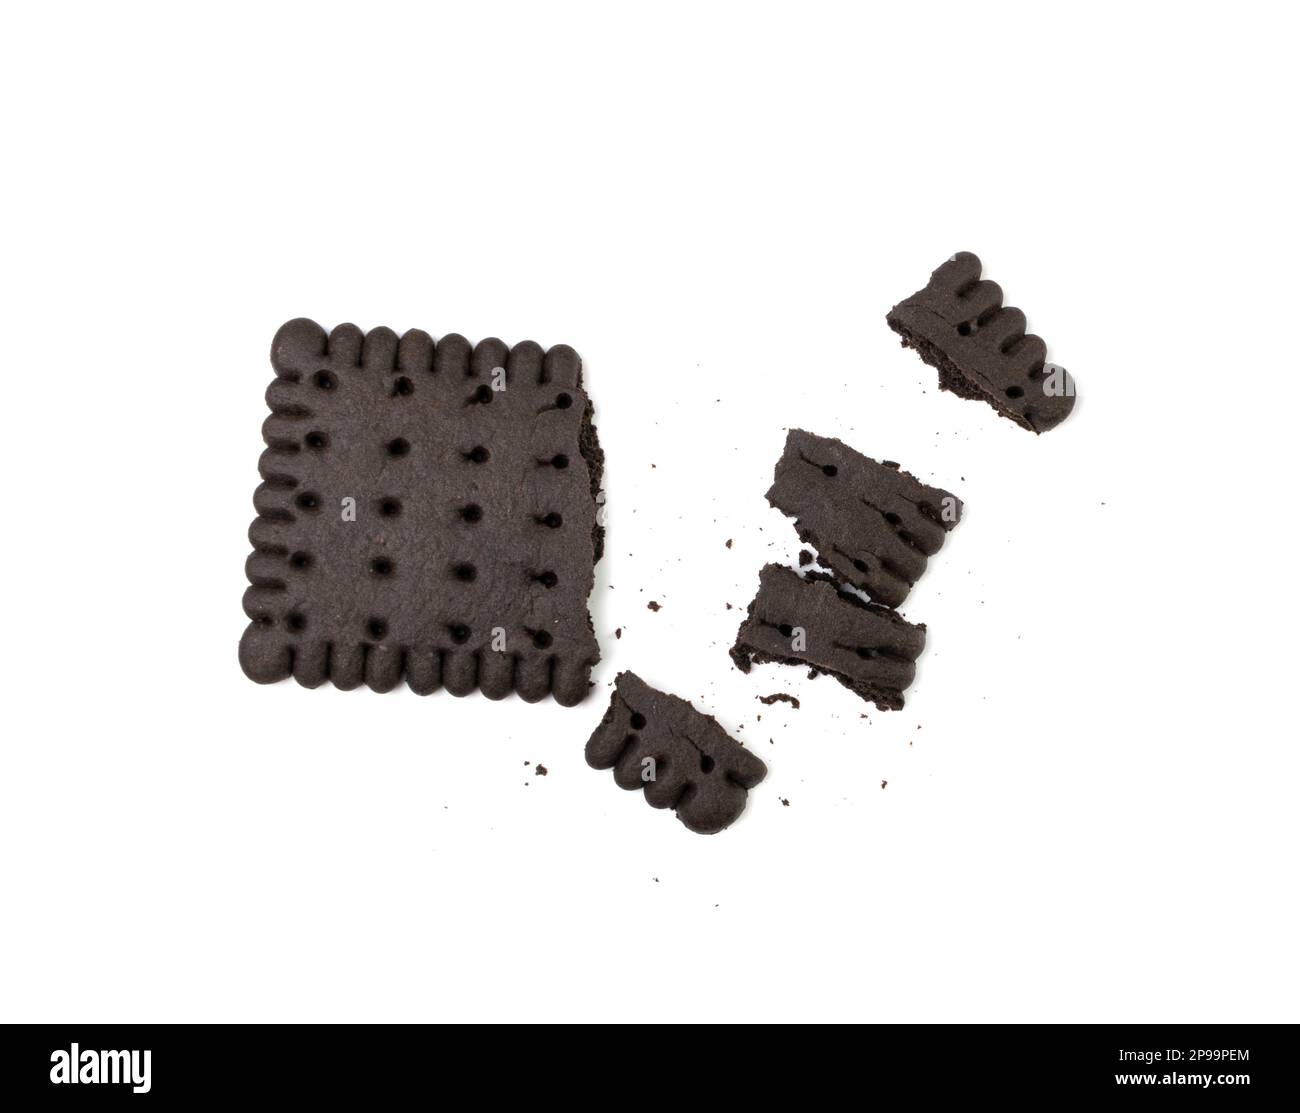 Broken Chocolate Biscuit Isolated, Black Crumbled Cookie, Dark Biscuit Pieces, Square Butter Cookies Bites, Fresh Sweet Cocoa Cracker Crumbs on White Stock Photo